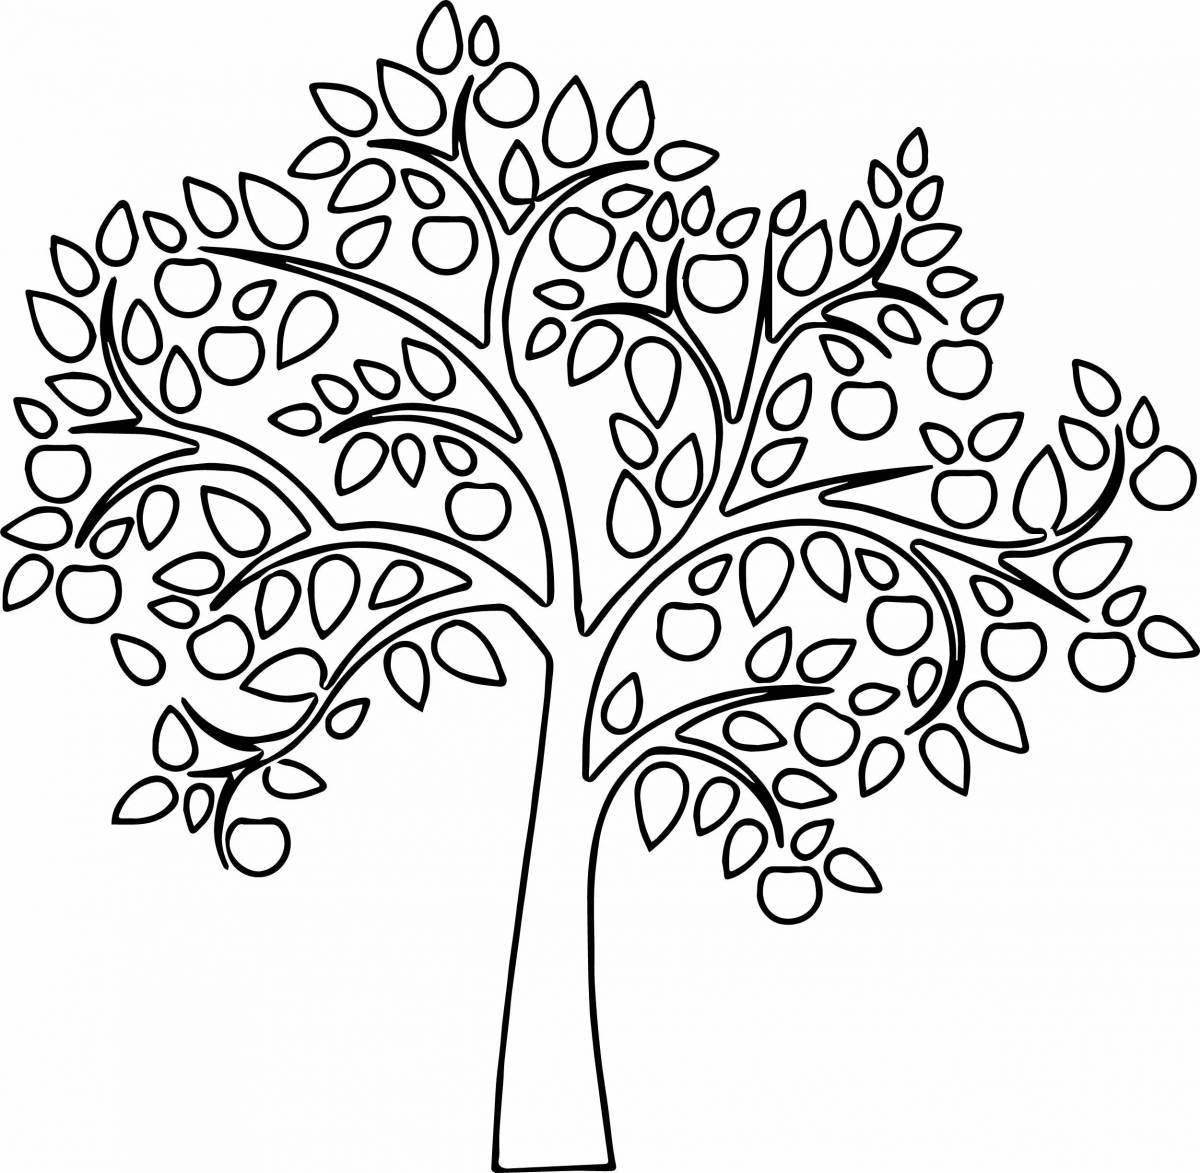 Magic tree trunk coloring book for kids